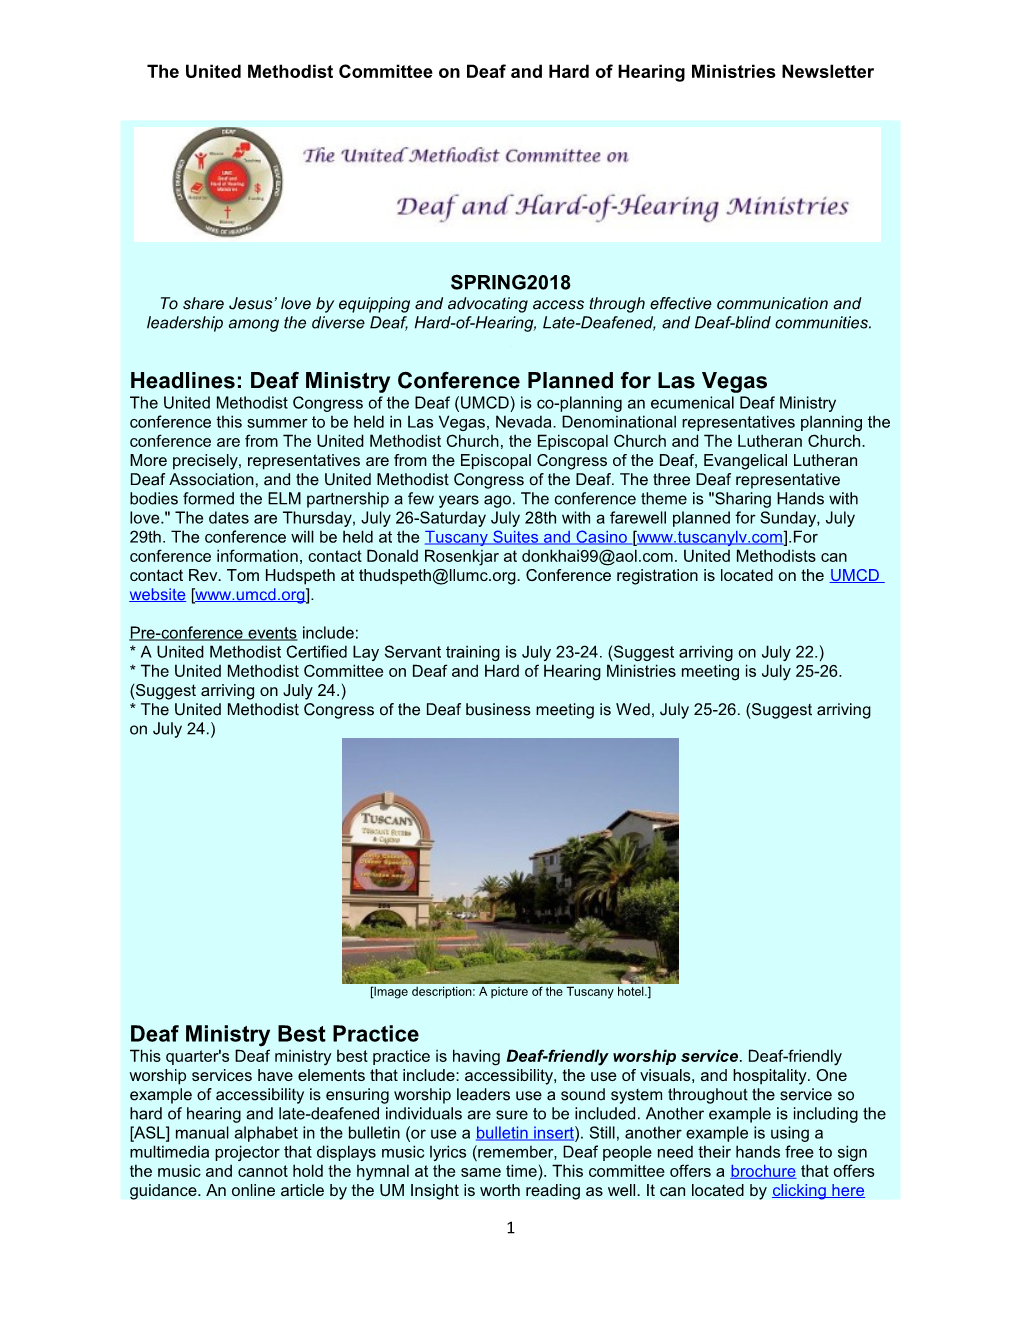 The United Methodist Committee on Deaf and Hard of Hearing Ministries Newsletter